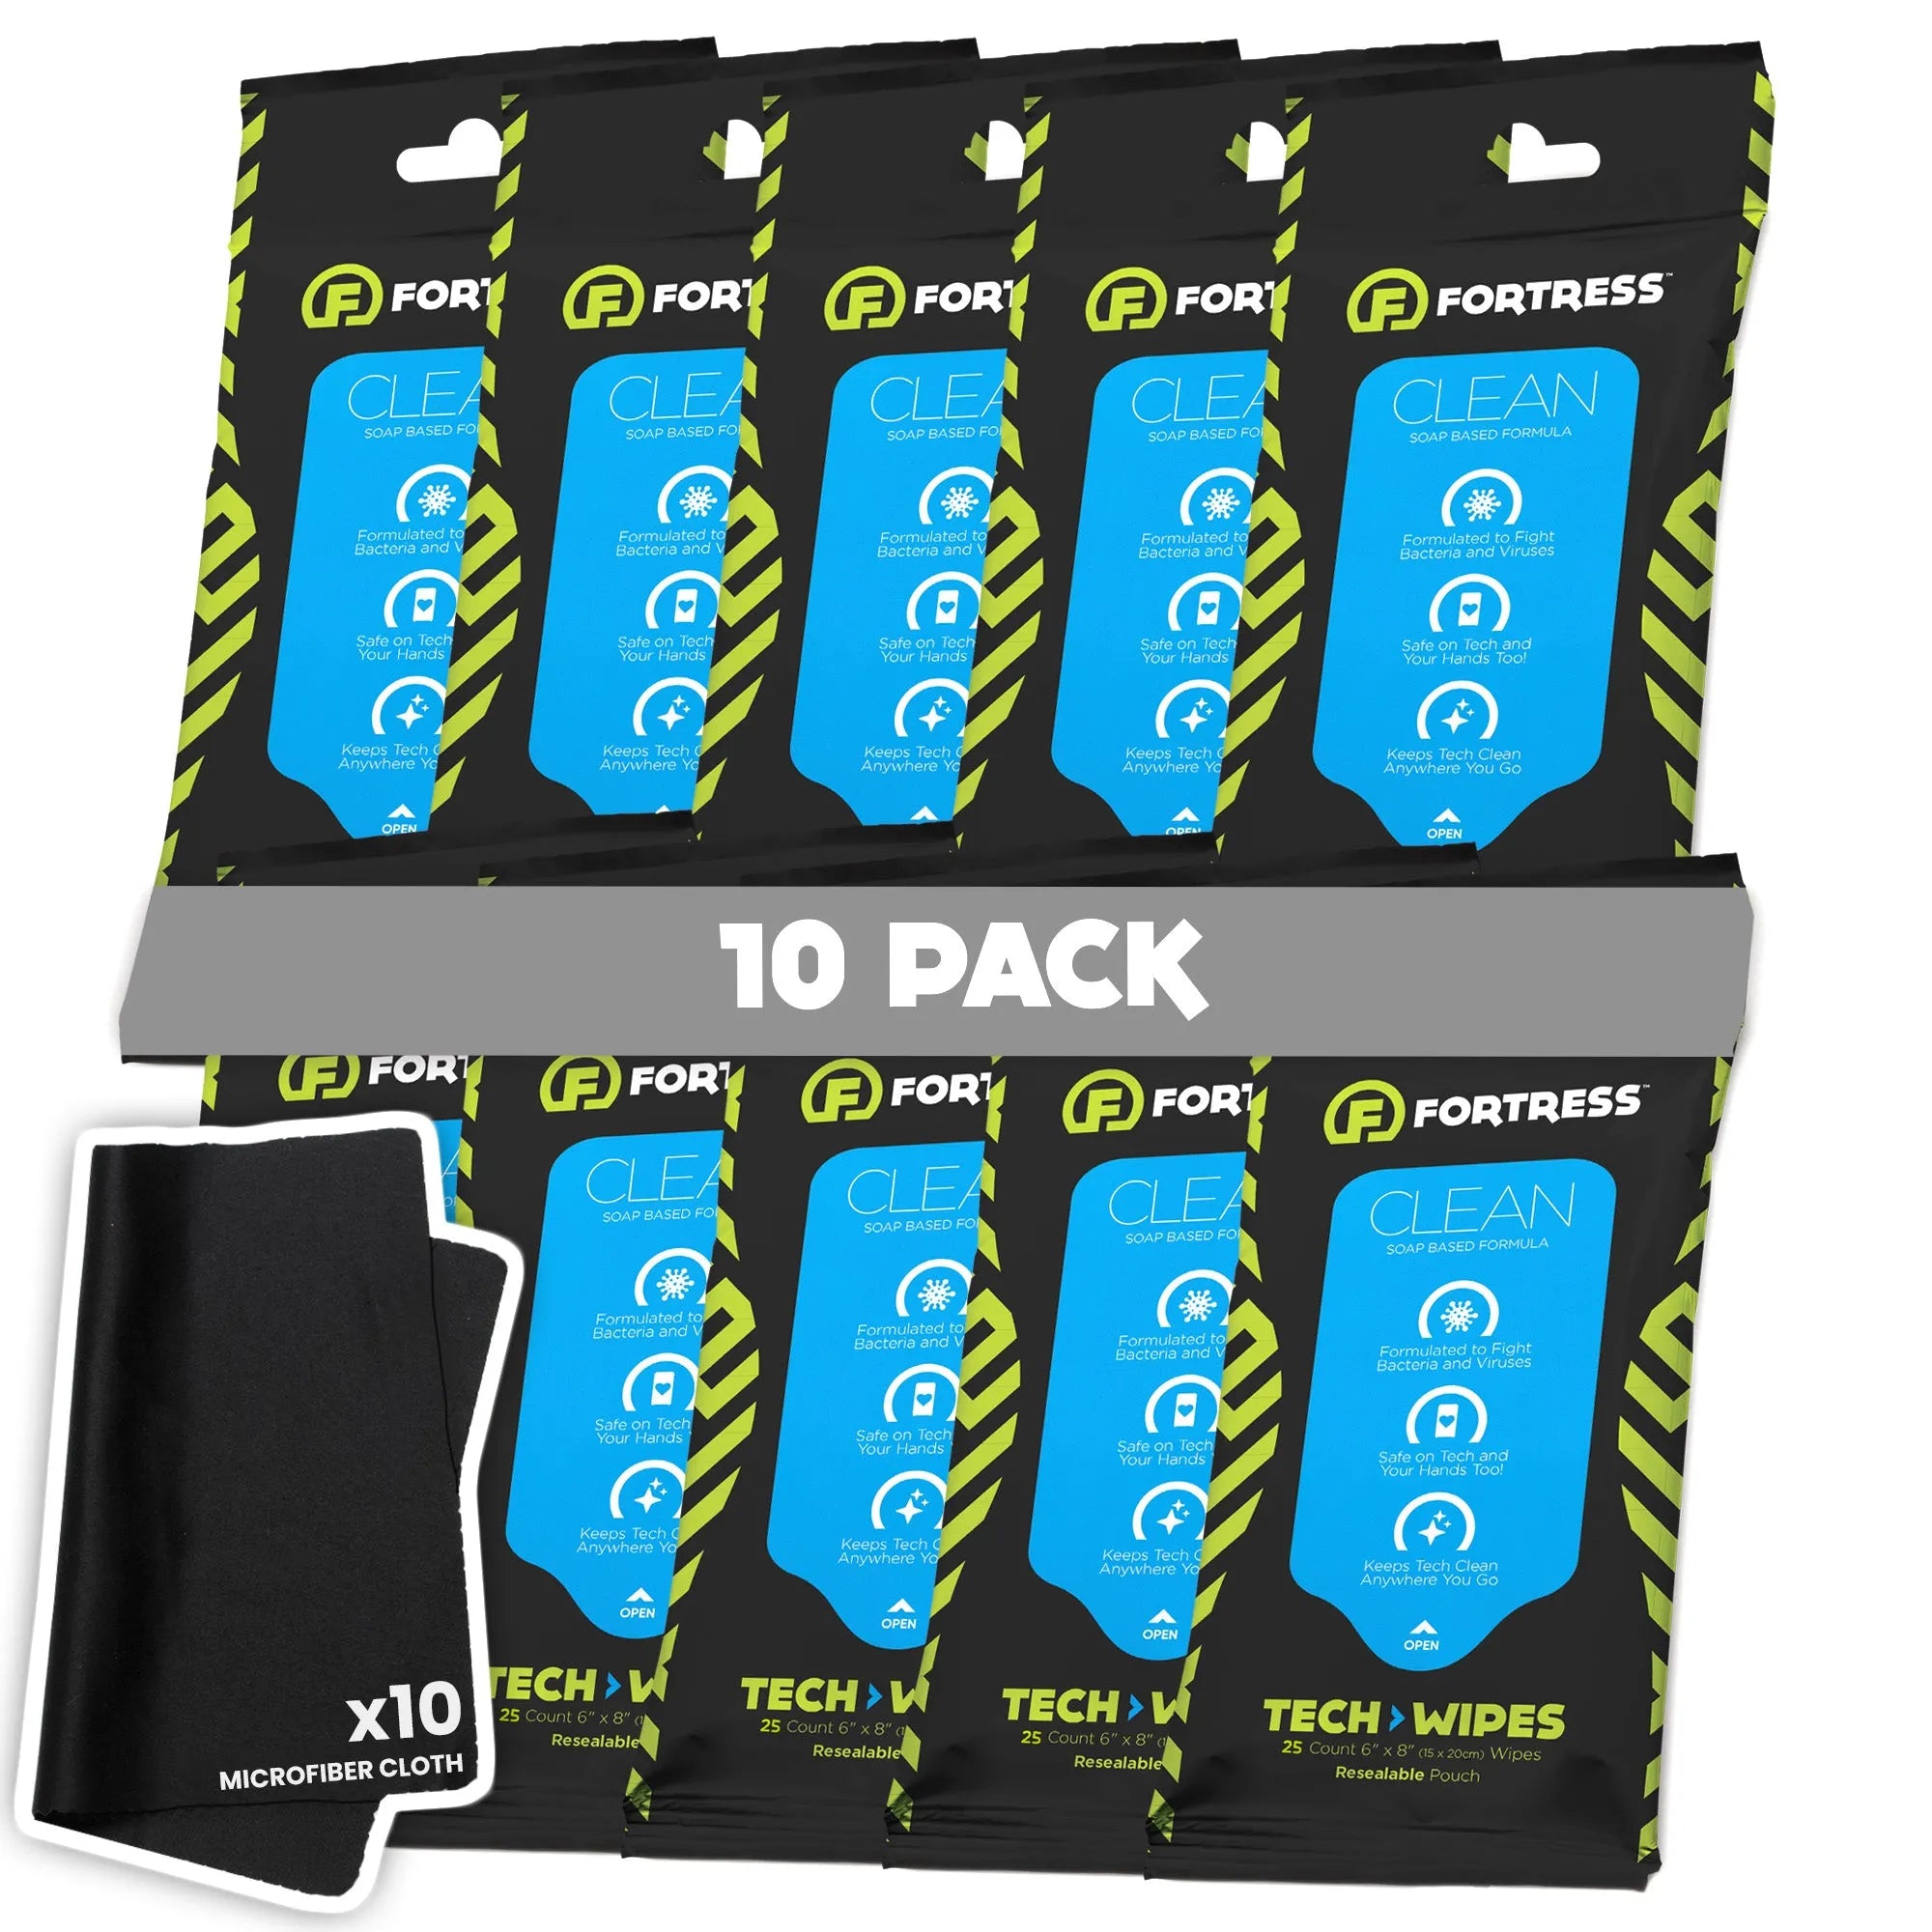 Fortress Tech Wipes (25 ct.) To-Go Disinfecting Wipes for Smartphones 10-PackYes Scooch Clean